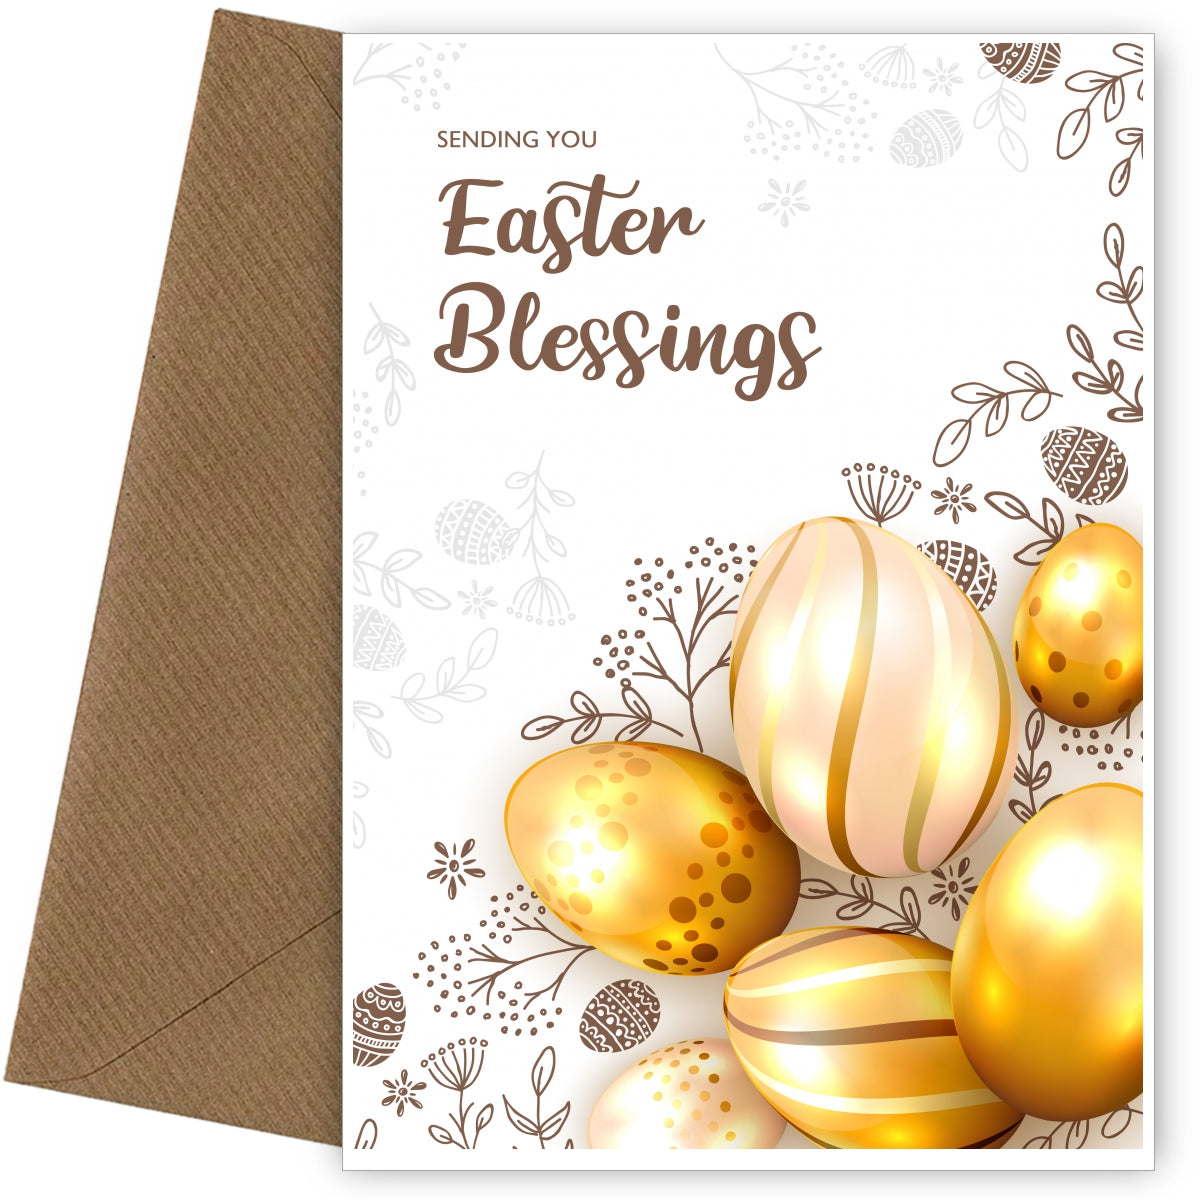 Traditional Easter Card for Family and Friends - Gold Luxury Easter Eggs